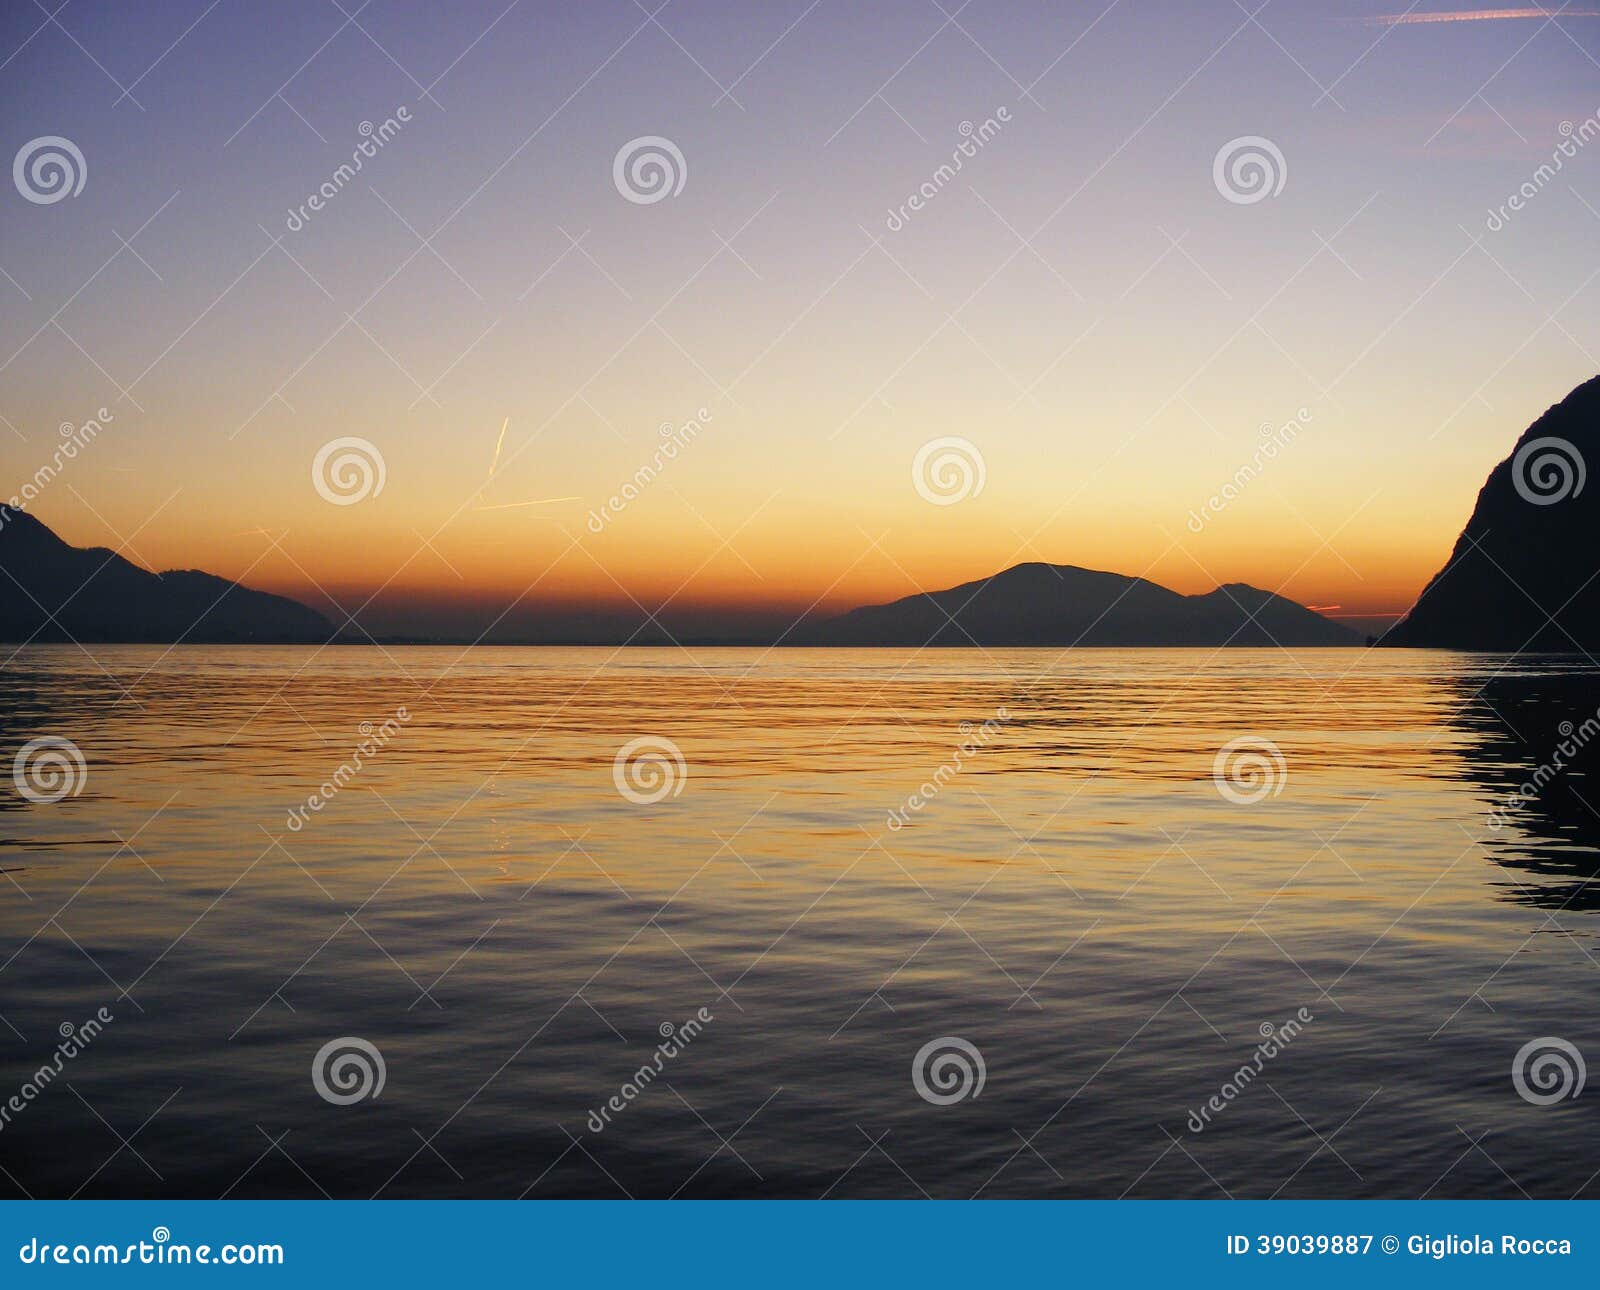 spring sunset over the lake of iseo ,italy